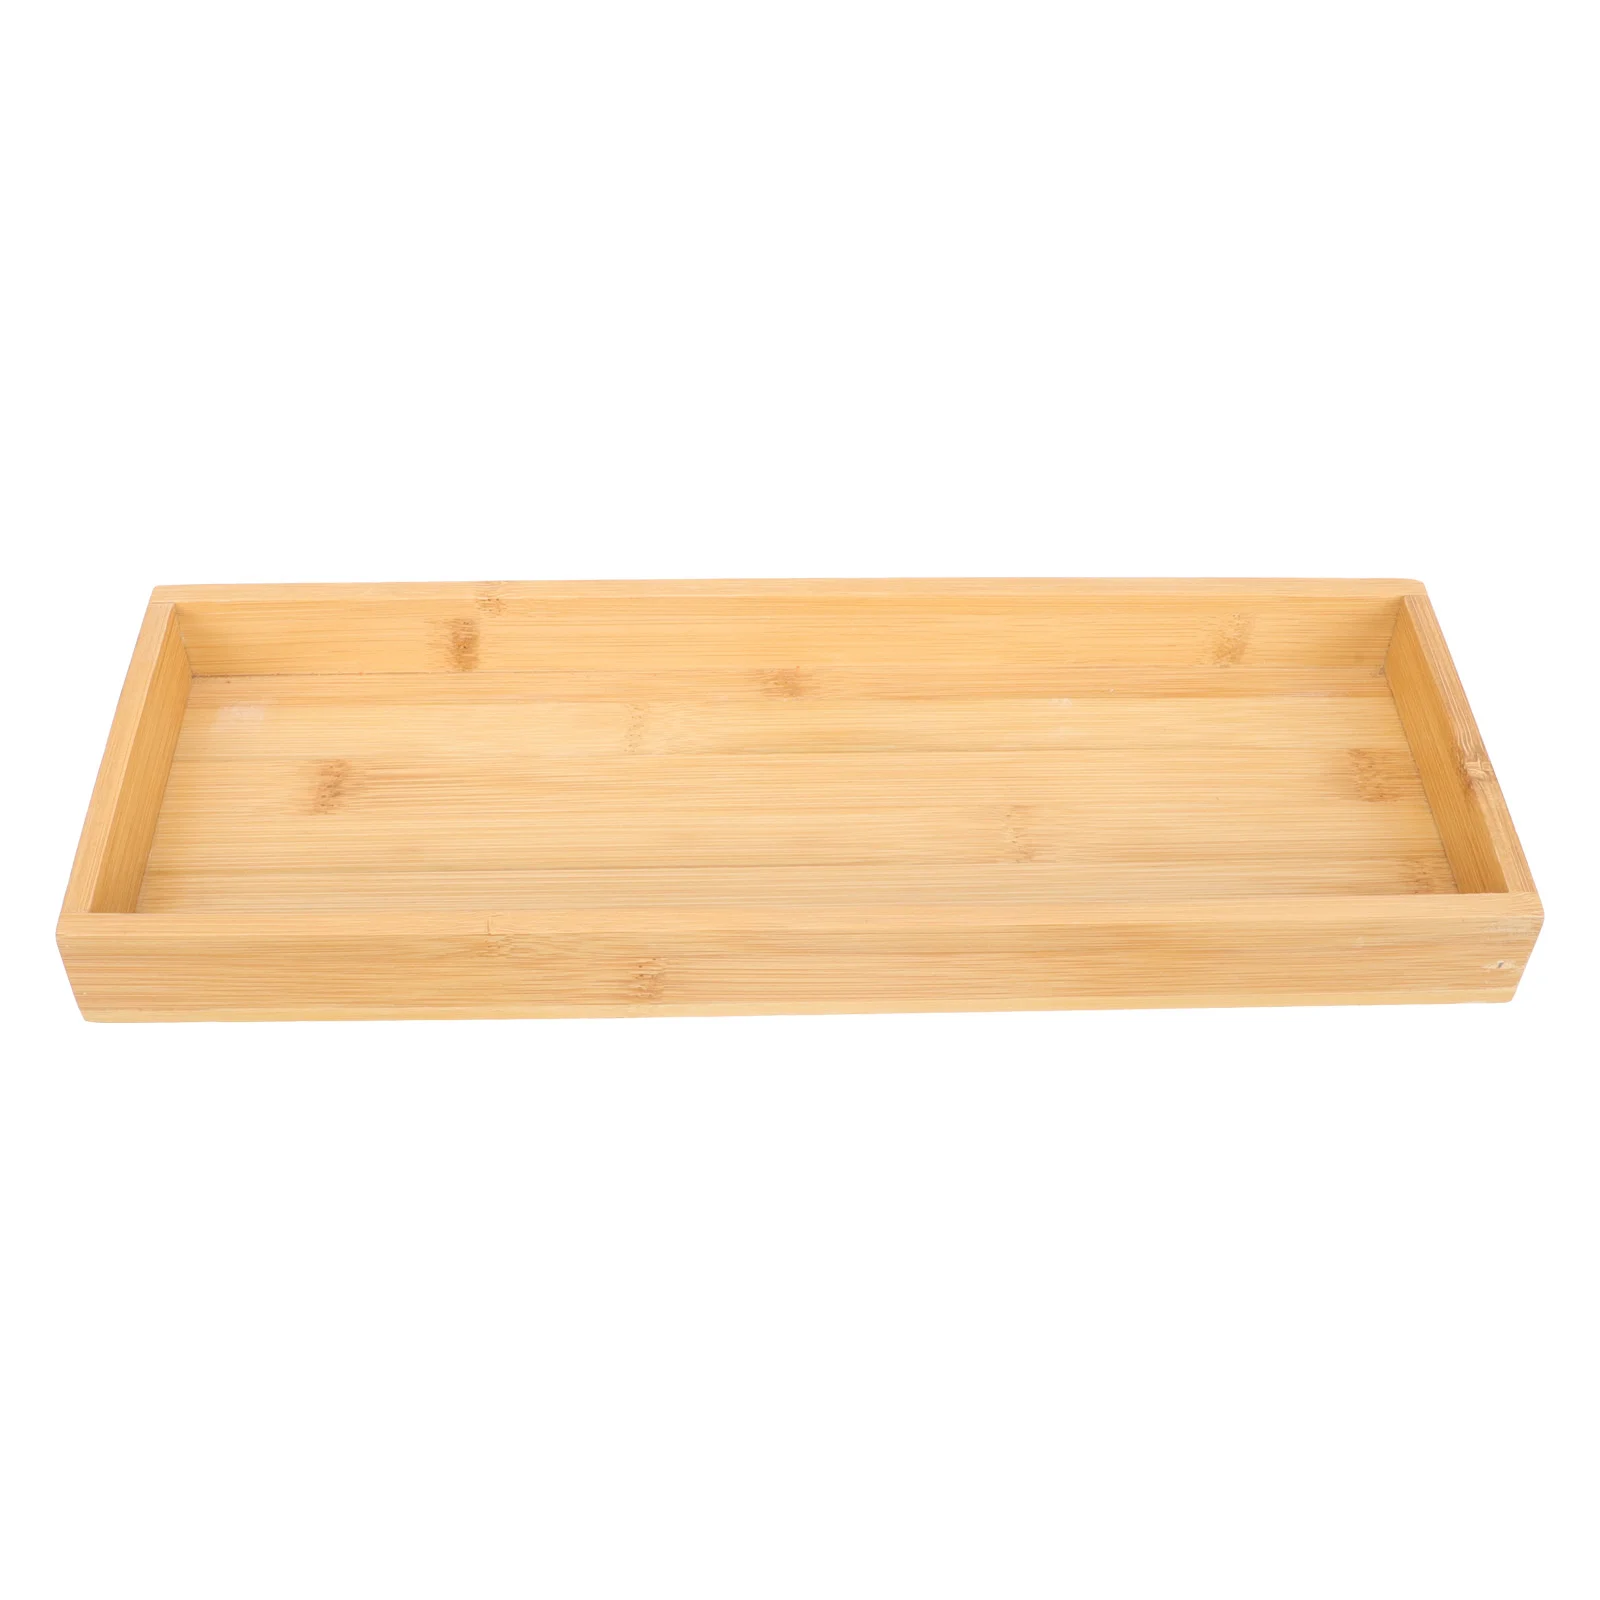 

Wood Serving Tray Japanese Style Wooden Tea Tray Wood Plate Tea Serving Platter Breakfast Tray for Lunch Dinner Pastries Snacks